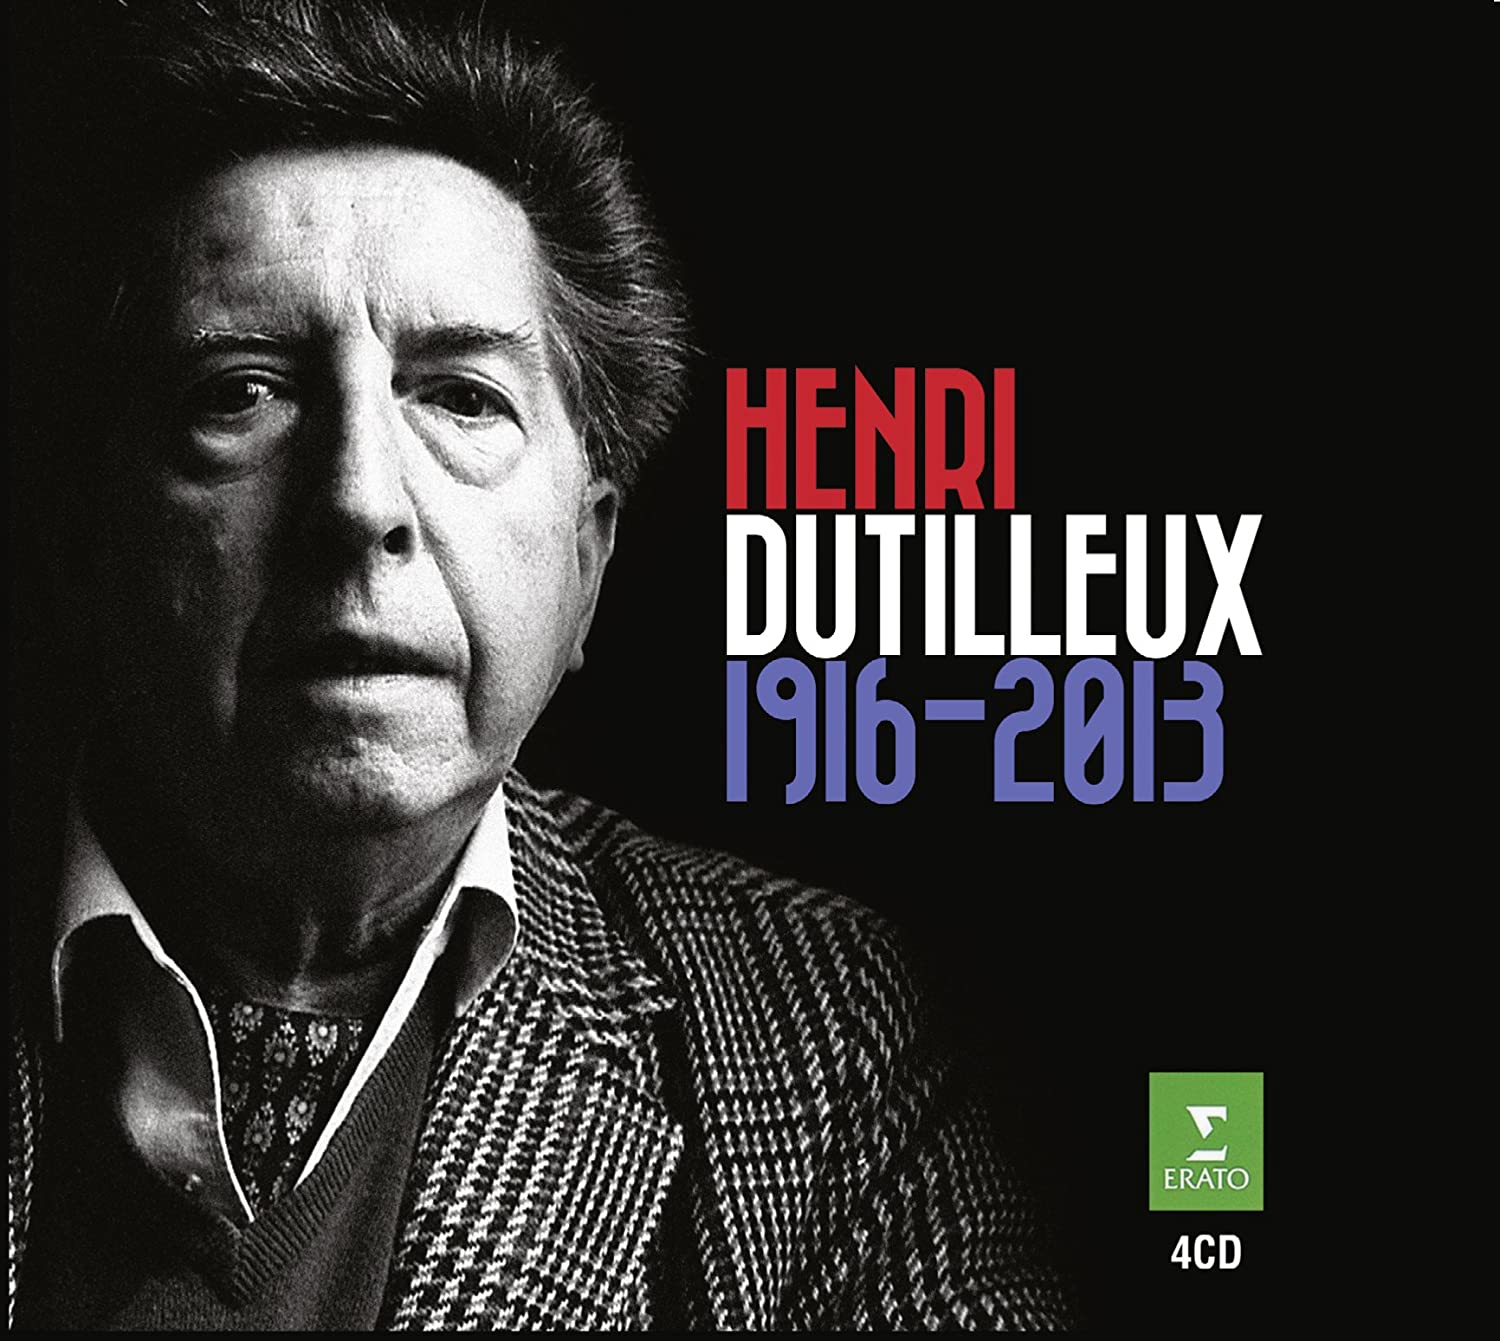 Dutilleux-Oeuvres orchestrales - Page 3 81x6Mucl90L._SL1500_